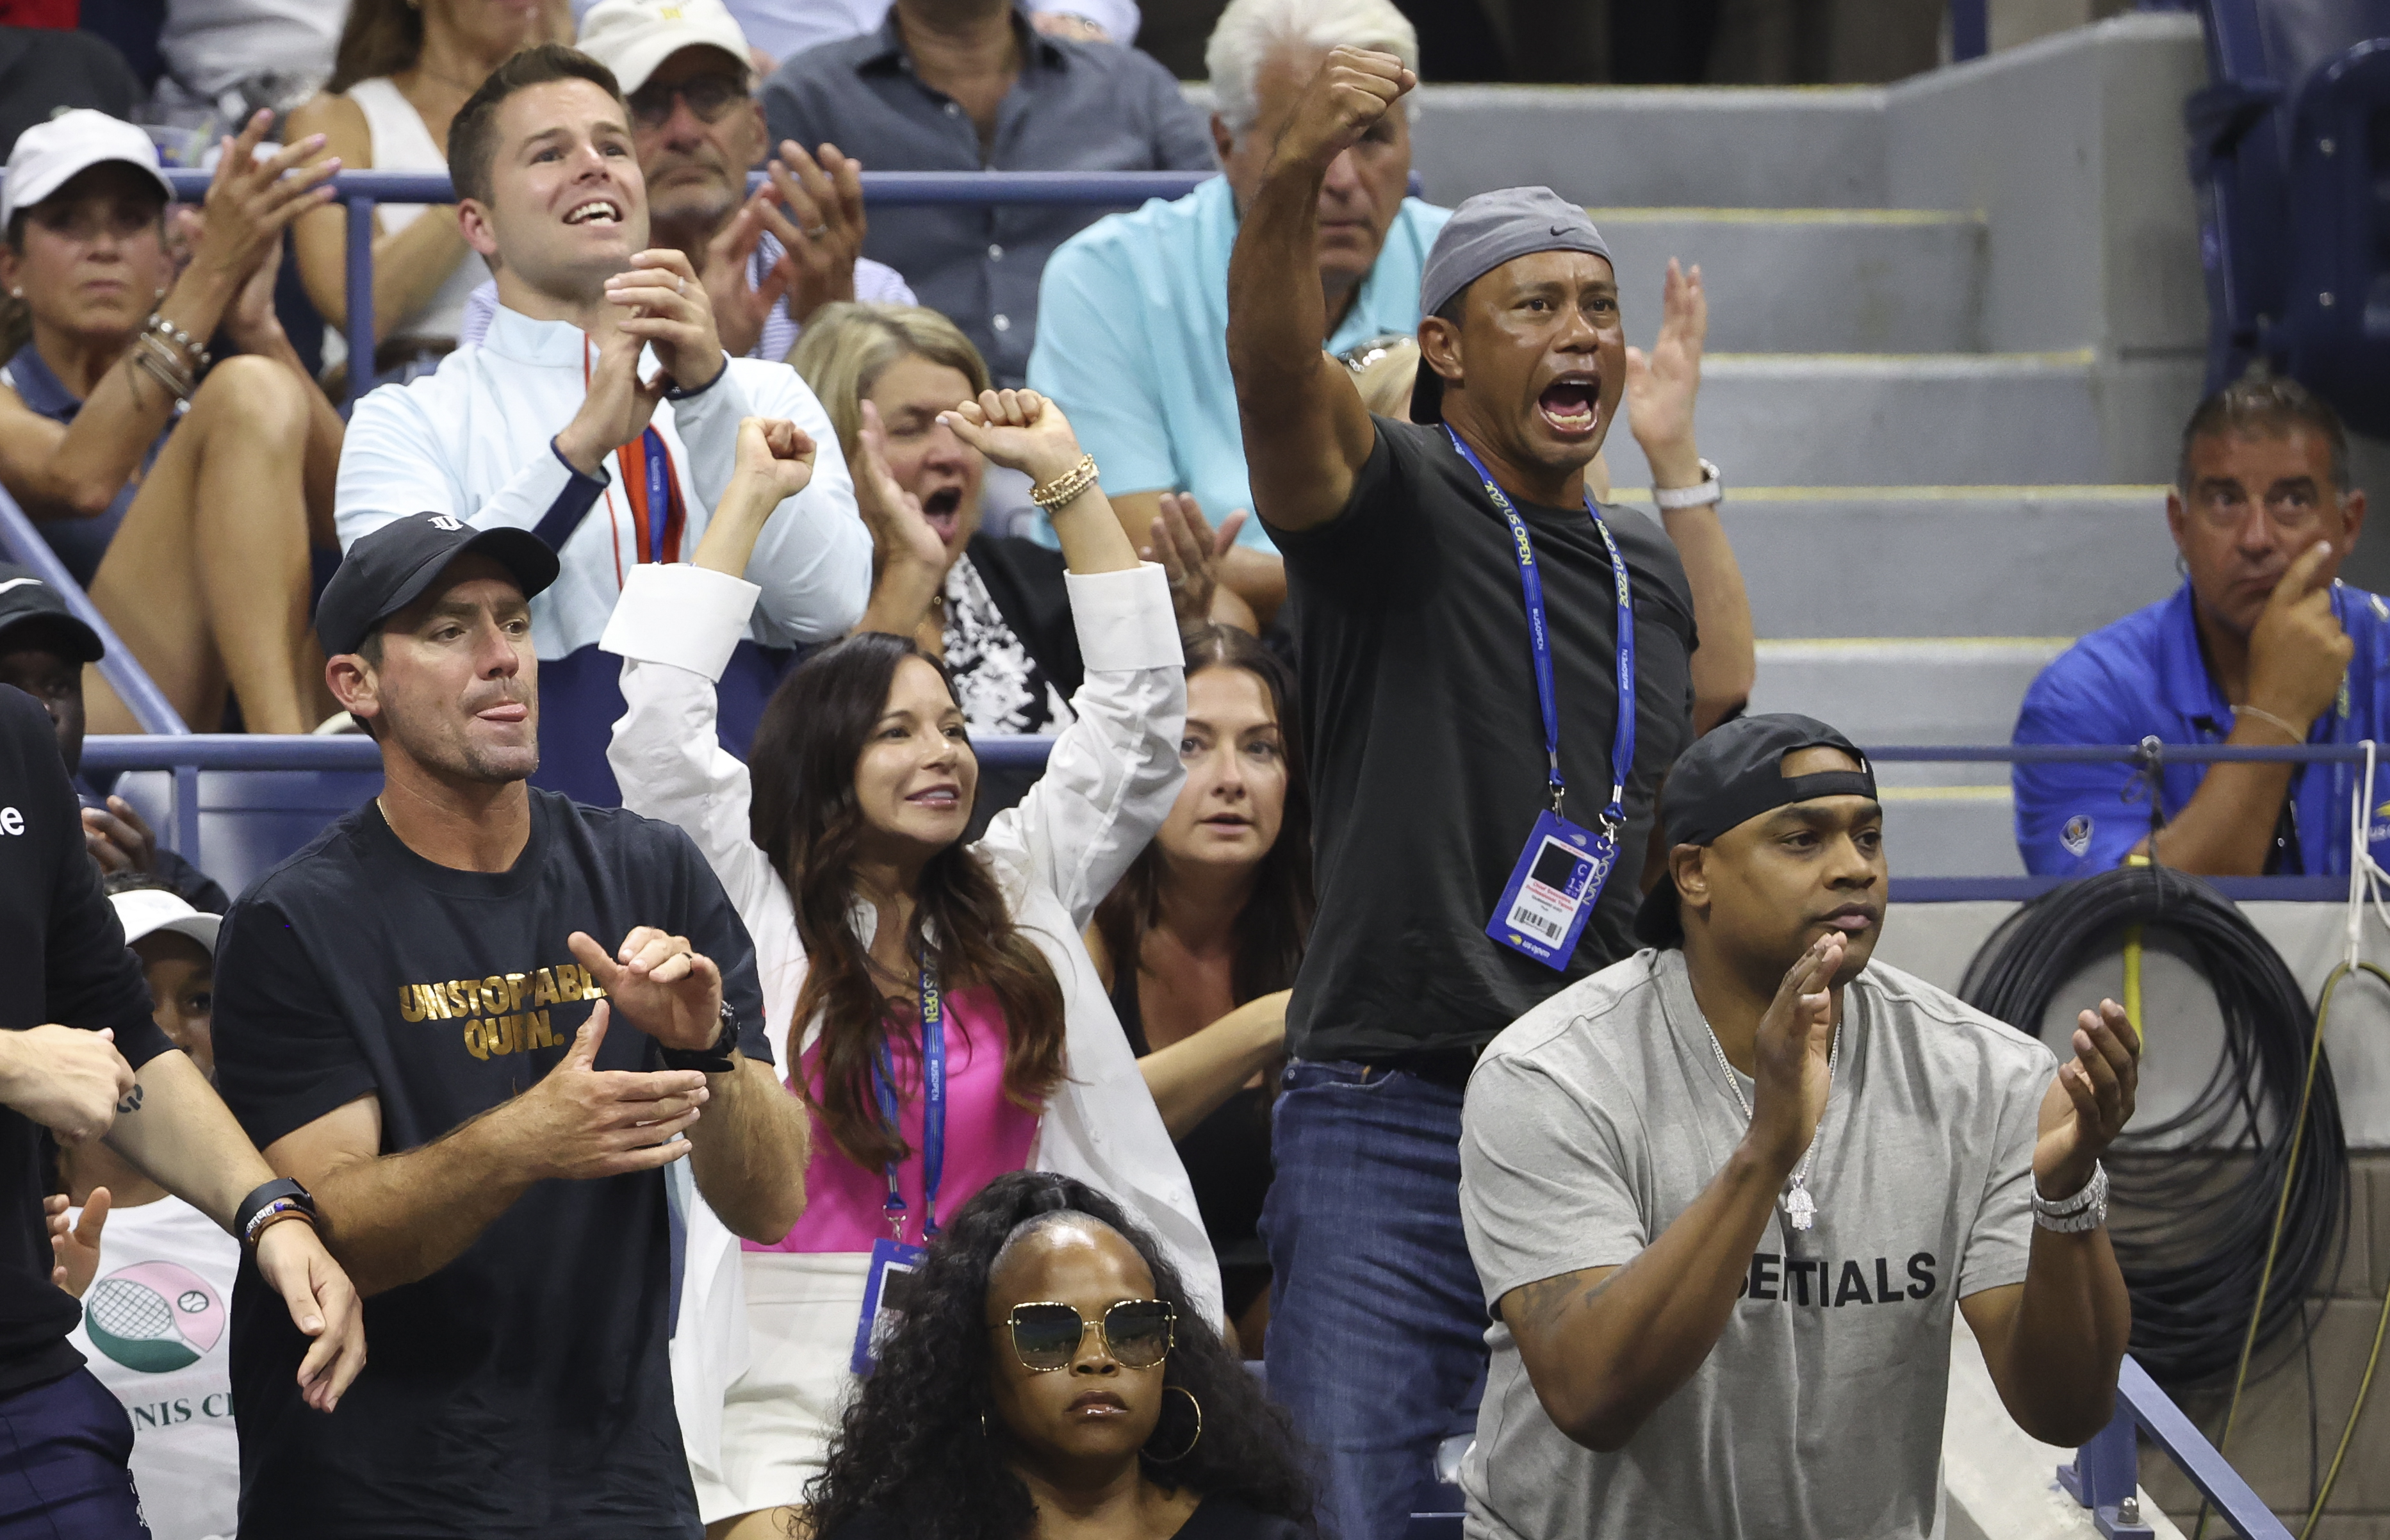 Tiger Woods during the US Open Tennis Championship 2022 at the USTA National Tennis Centre on August 31st 2022 in Flushing, Queens, New York City. | Source: Getty Images